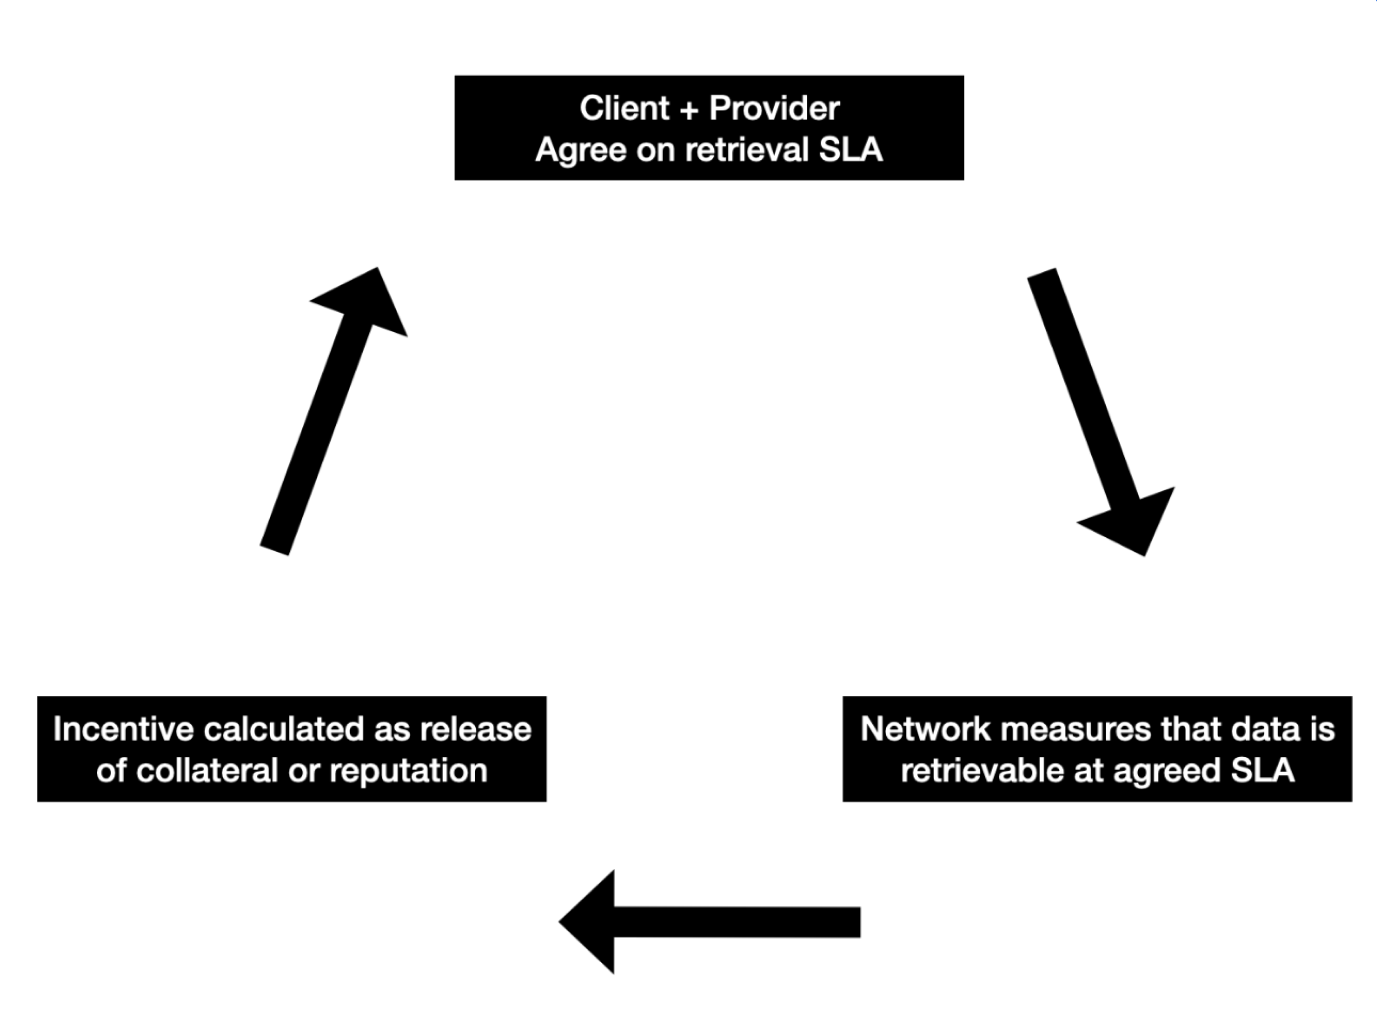 Retrieval SLAs reduce uncertainty and allow for better retrieval measurement and optimization